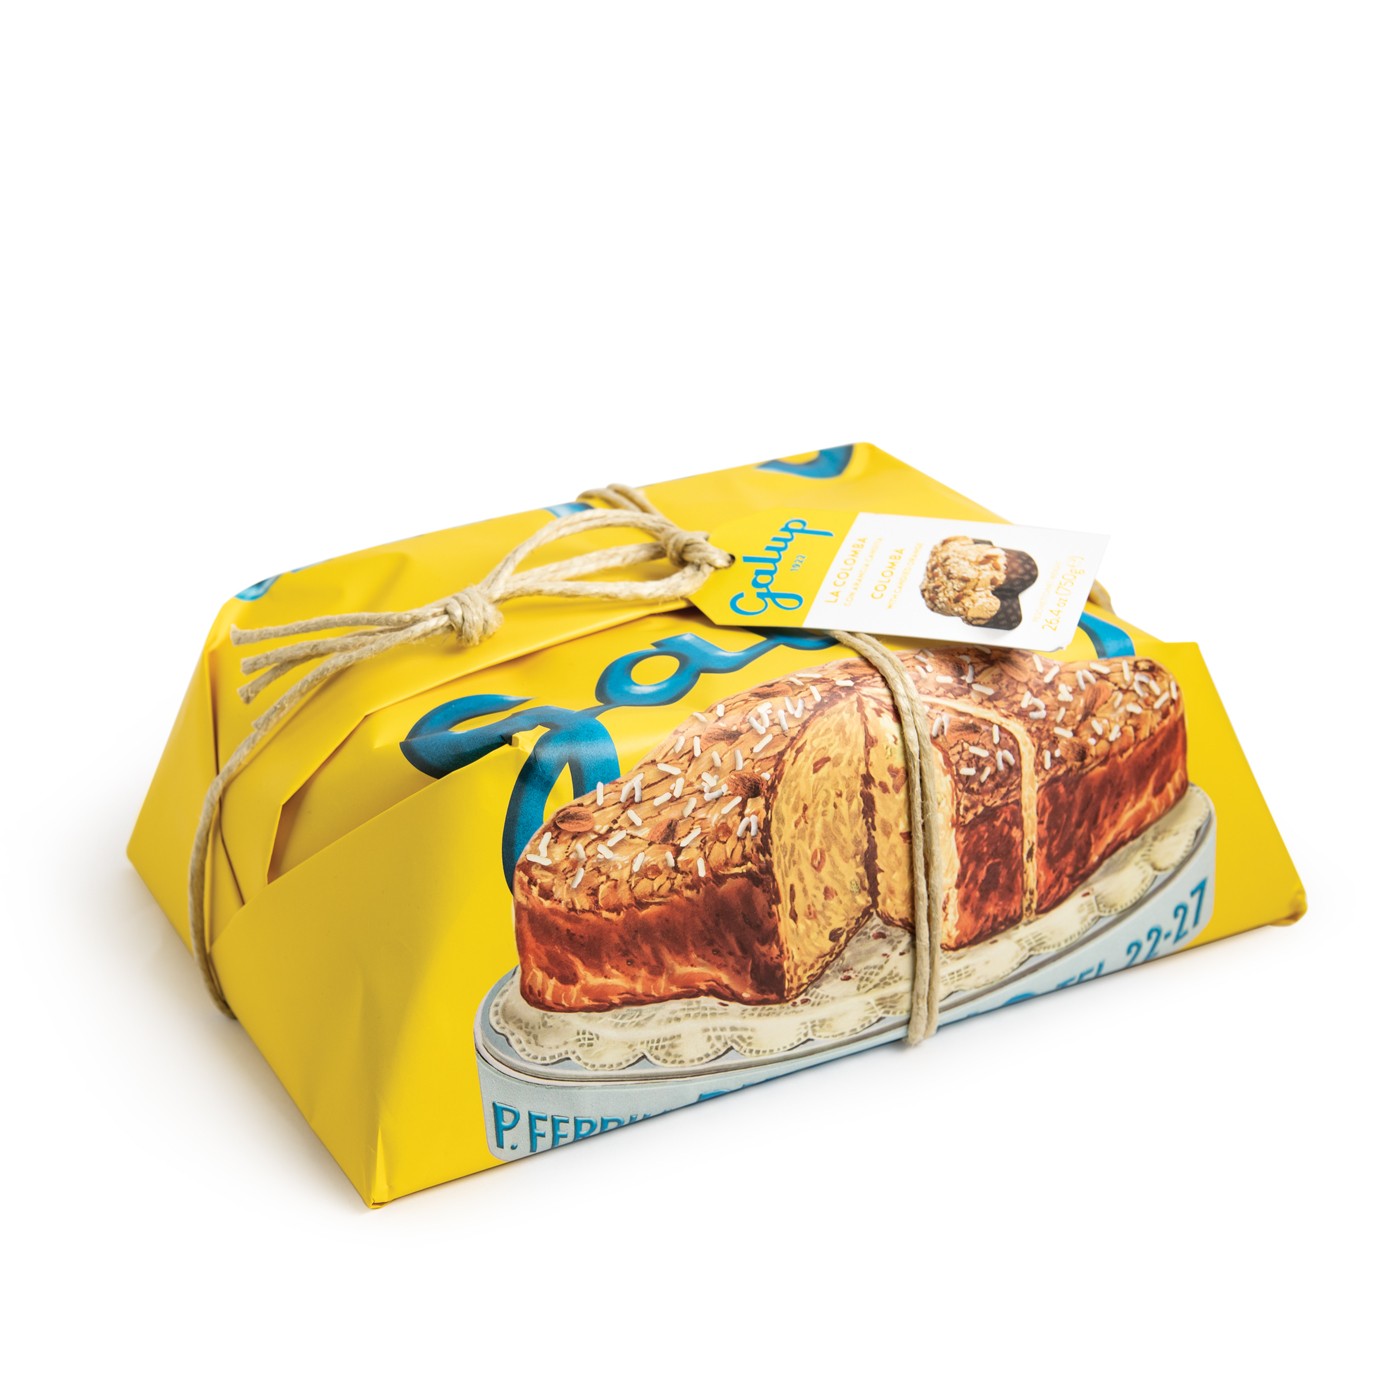 Gran Galup Classic Colomba 26.4 oz - Galup | Eataly.com